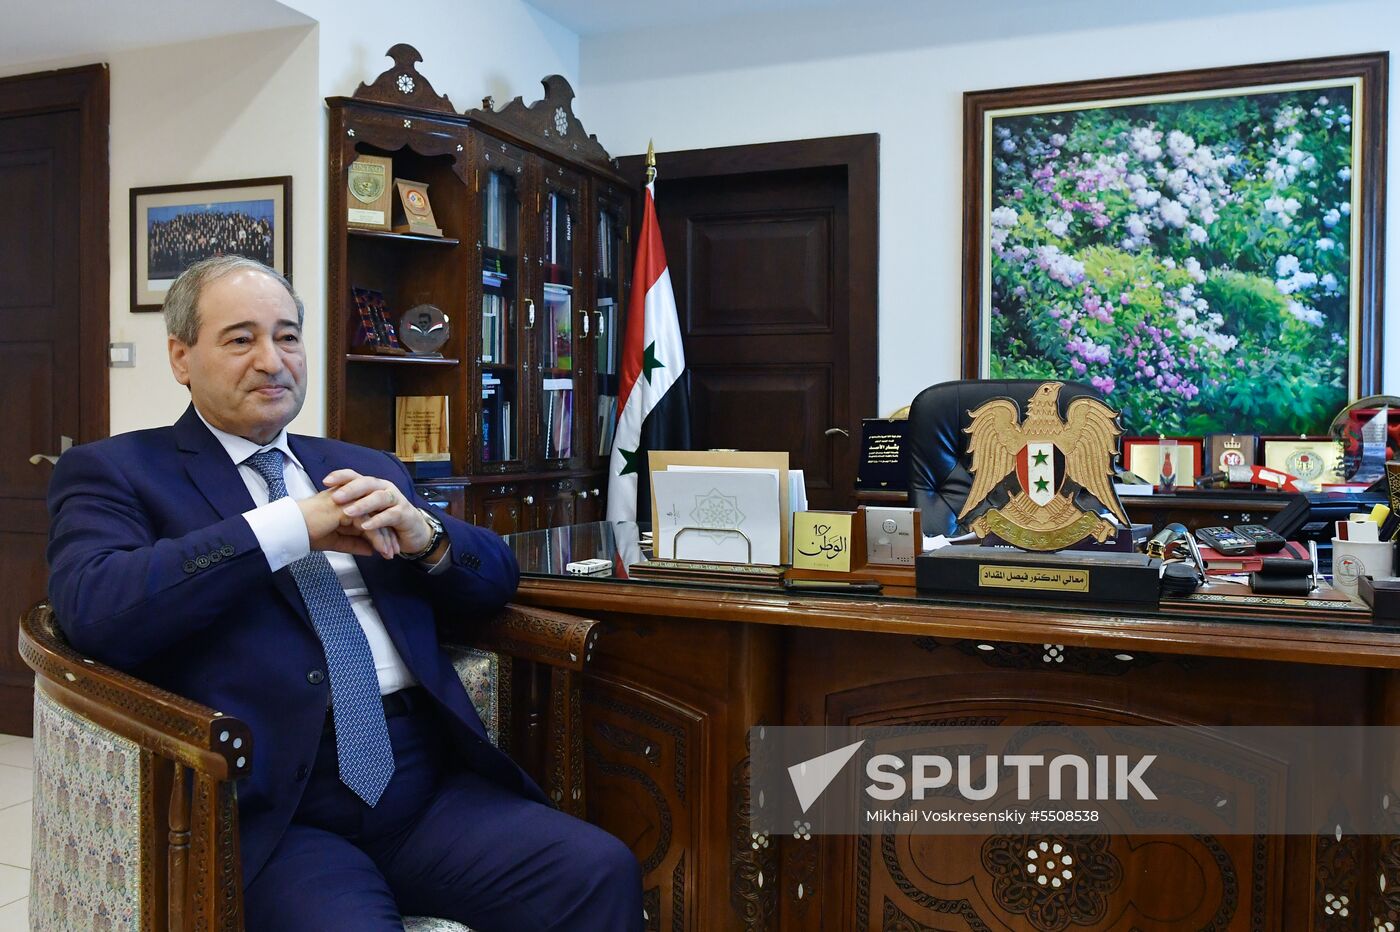 Interview with Syrian Deputy Foreign Minister Faisal Mekdad